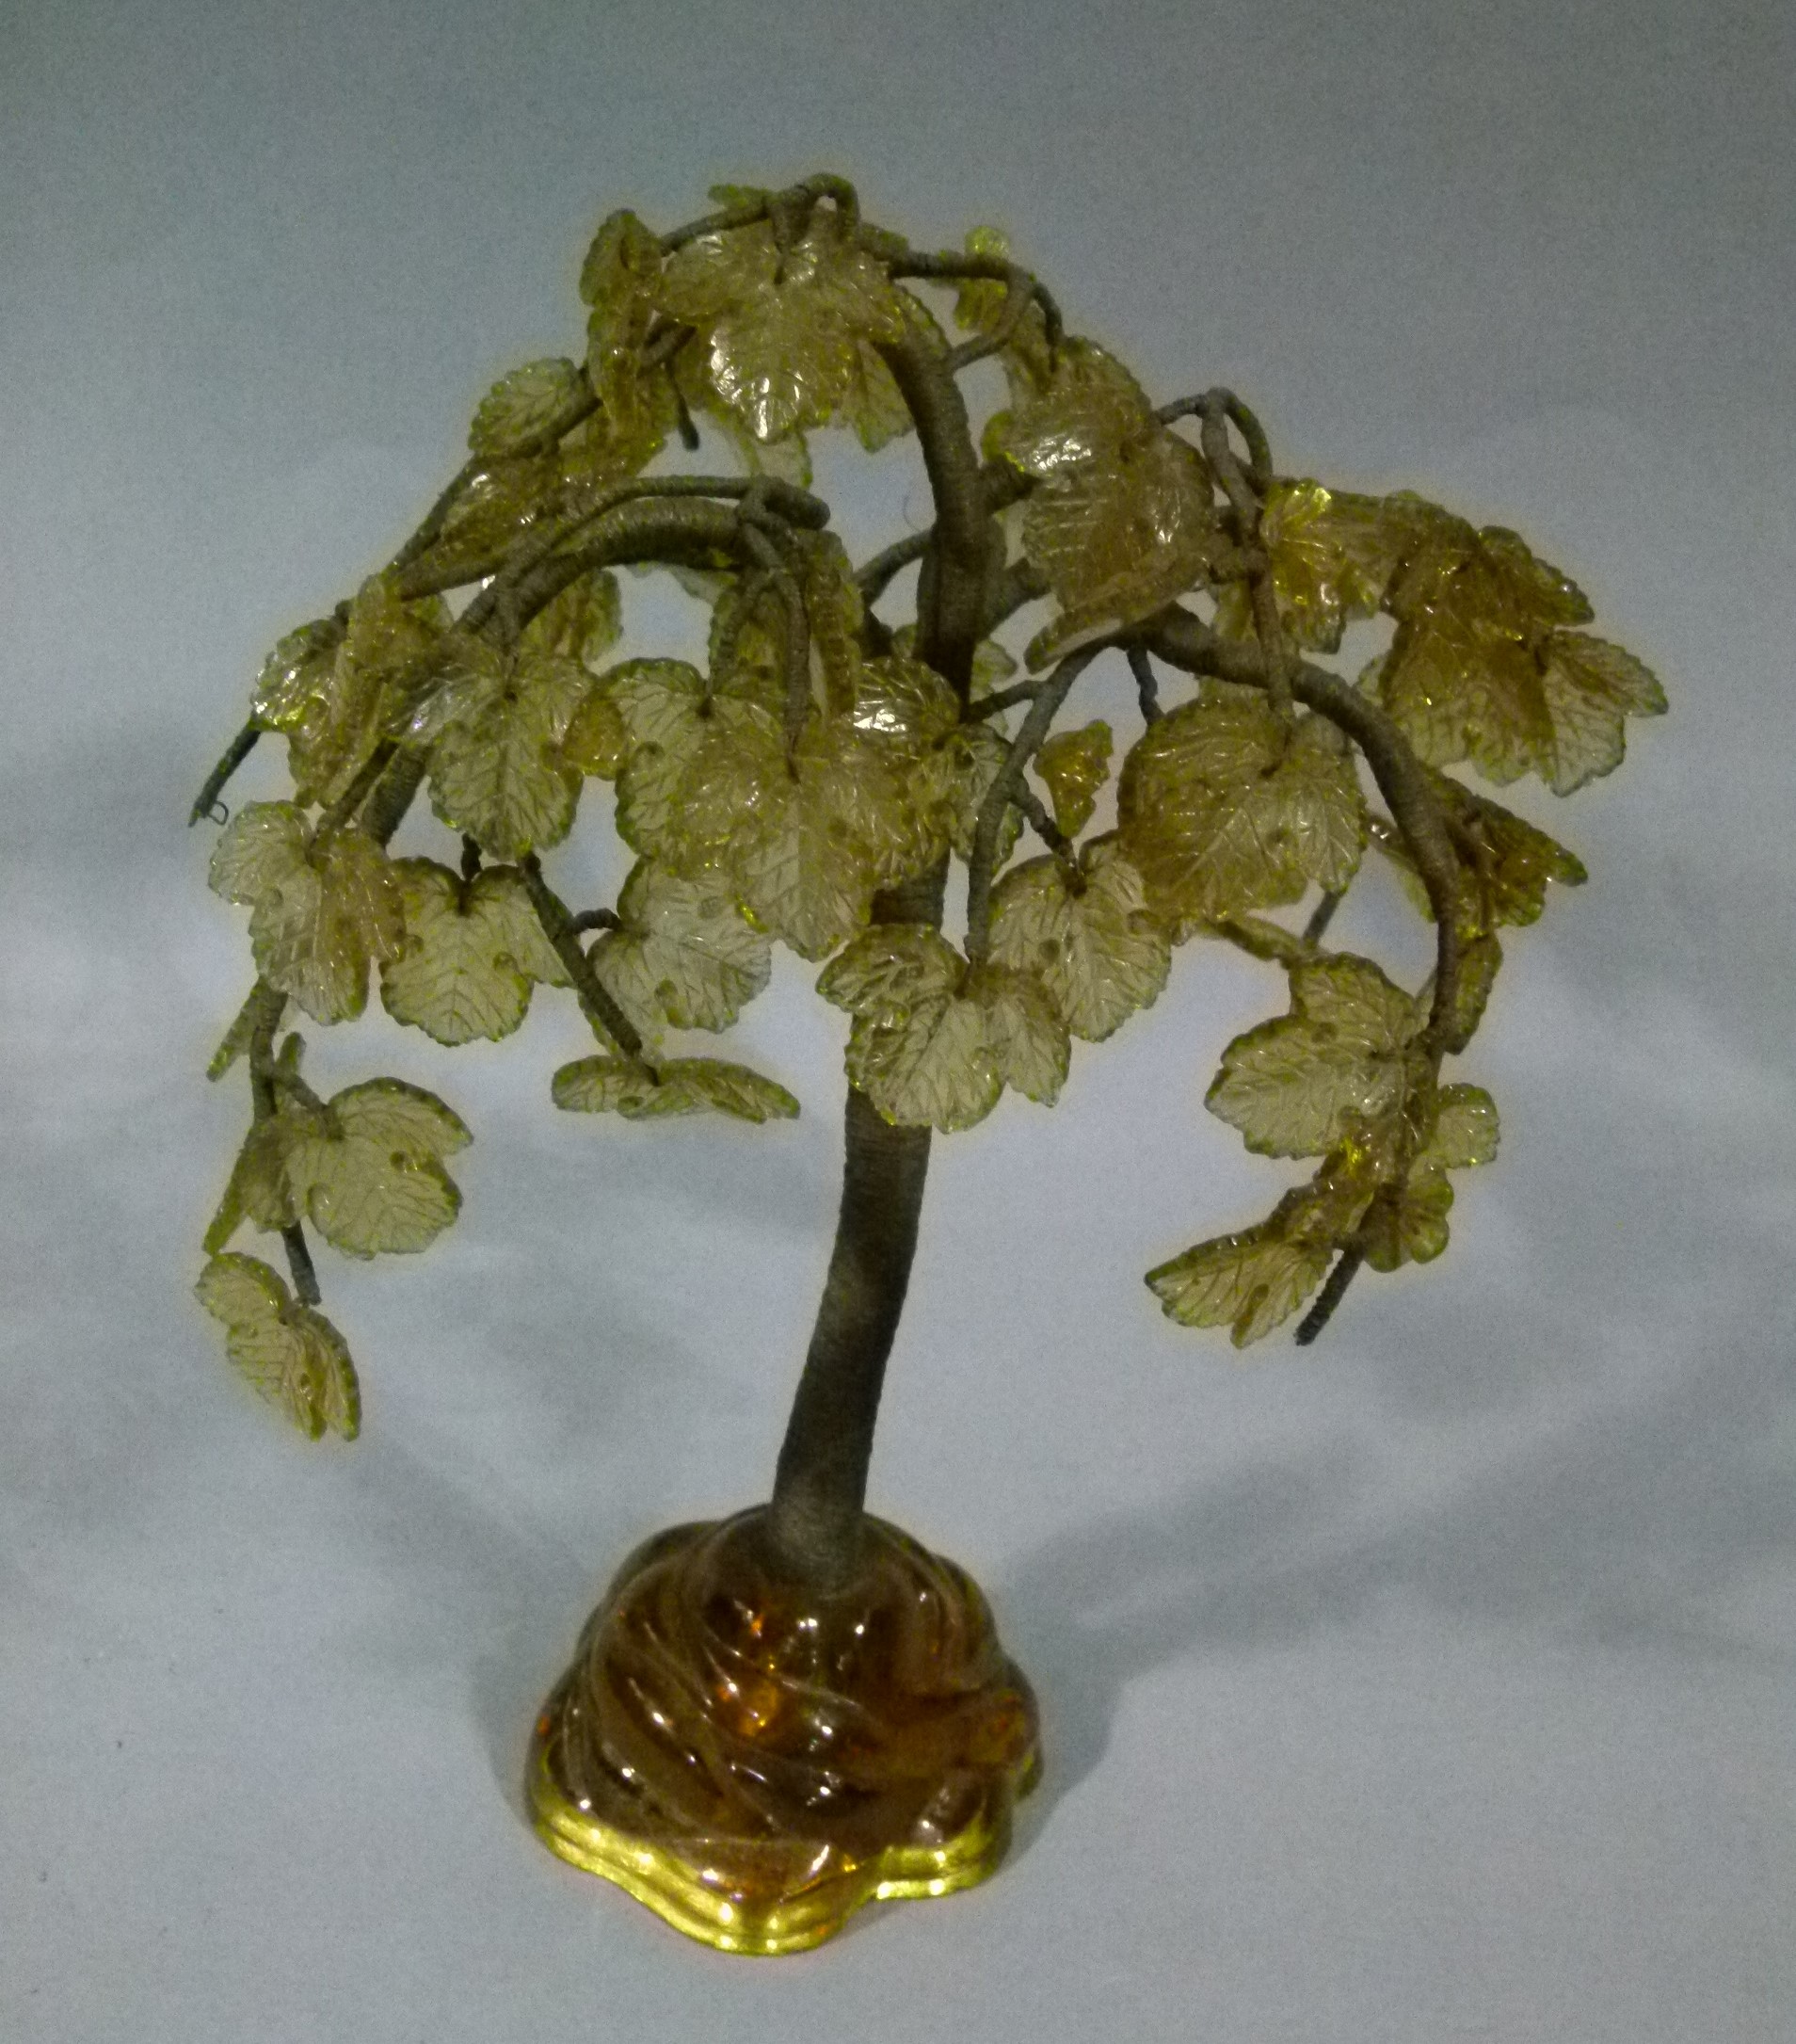 A glass and gilt metal weeping tree ornament on sculpted glass base